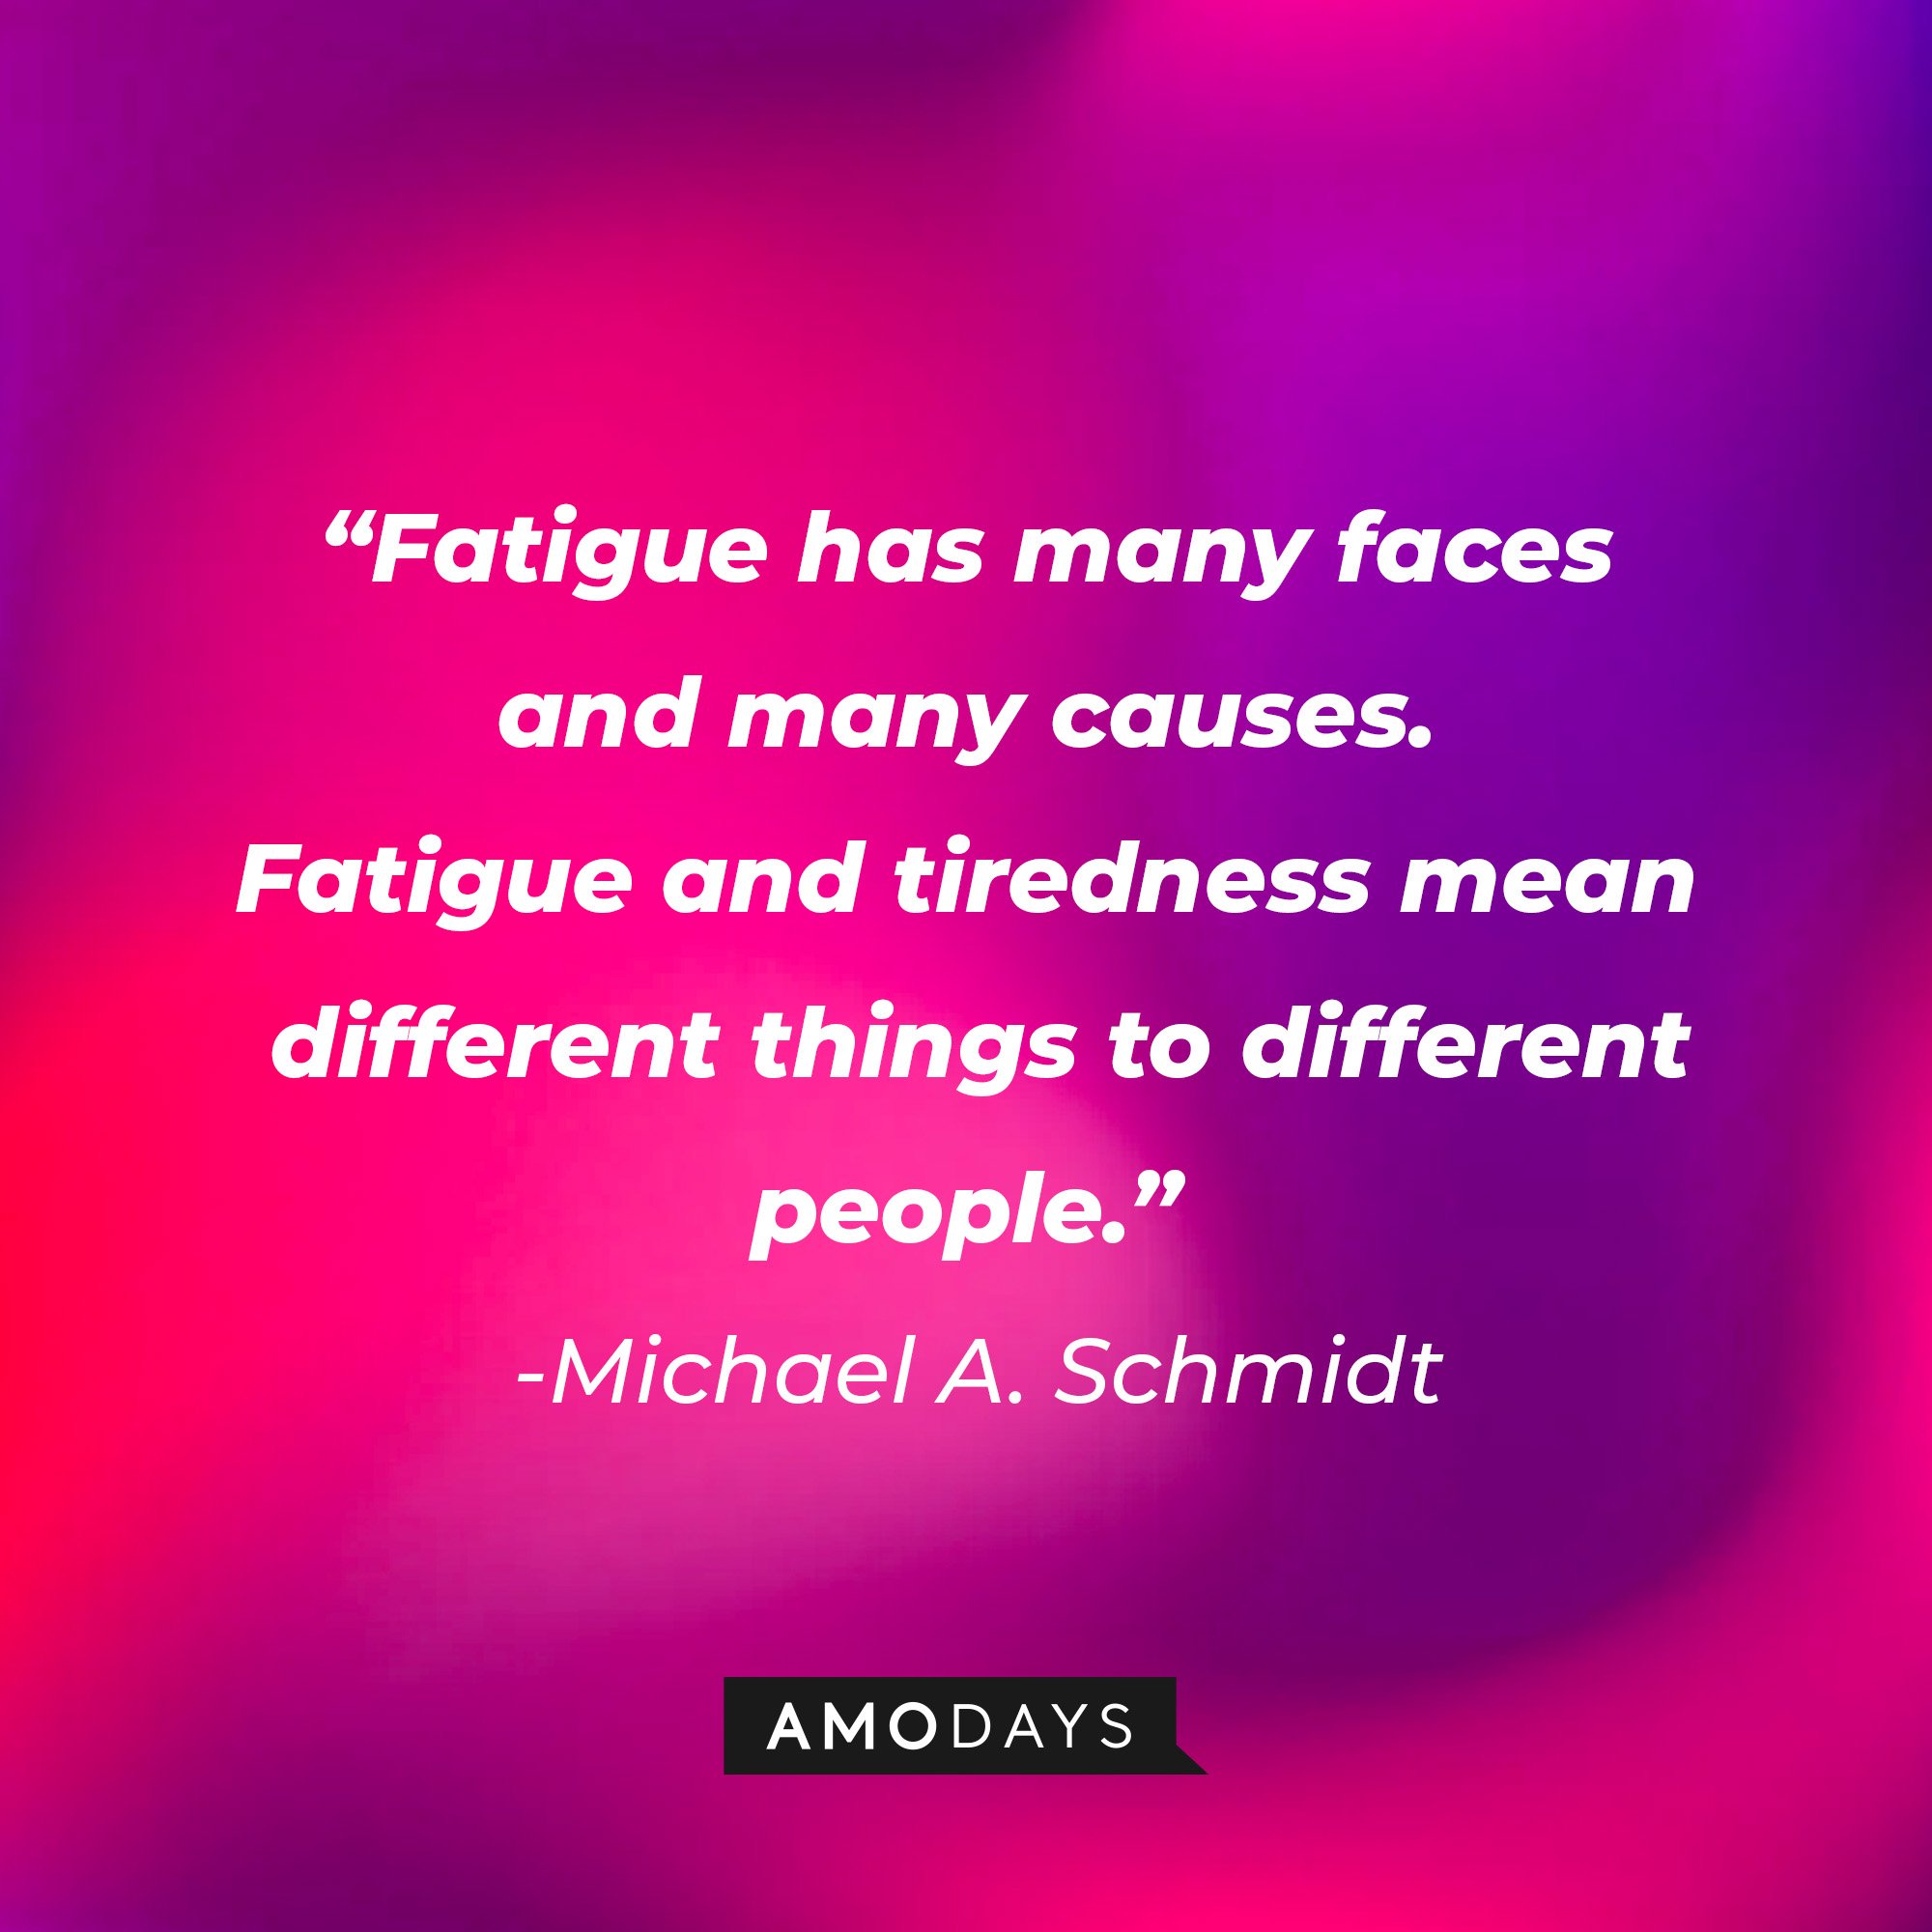 Michael A. Schmidt's quote: “Fatigue has many faces and many causes. Fatigue and tiredness mean different things to different people.” | Image: AmoDays